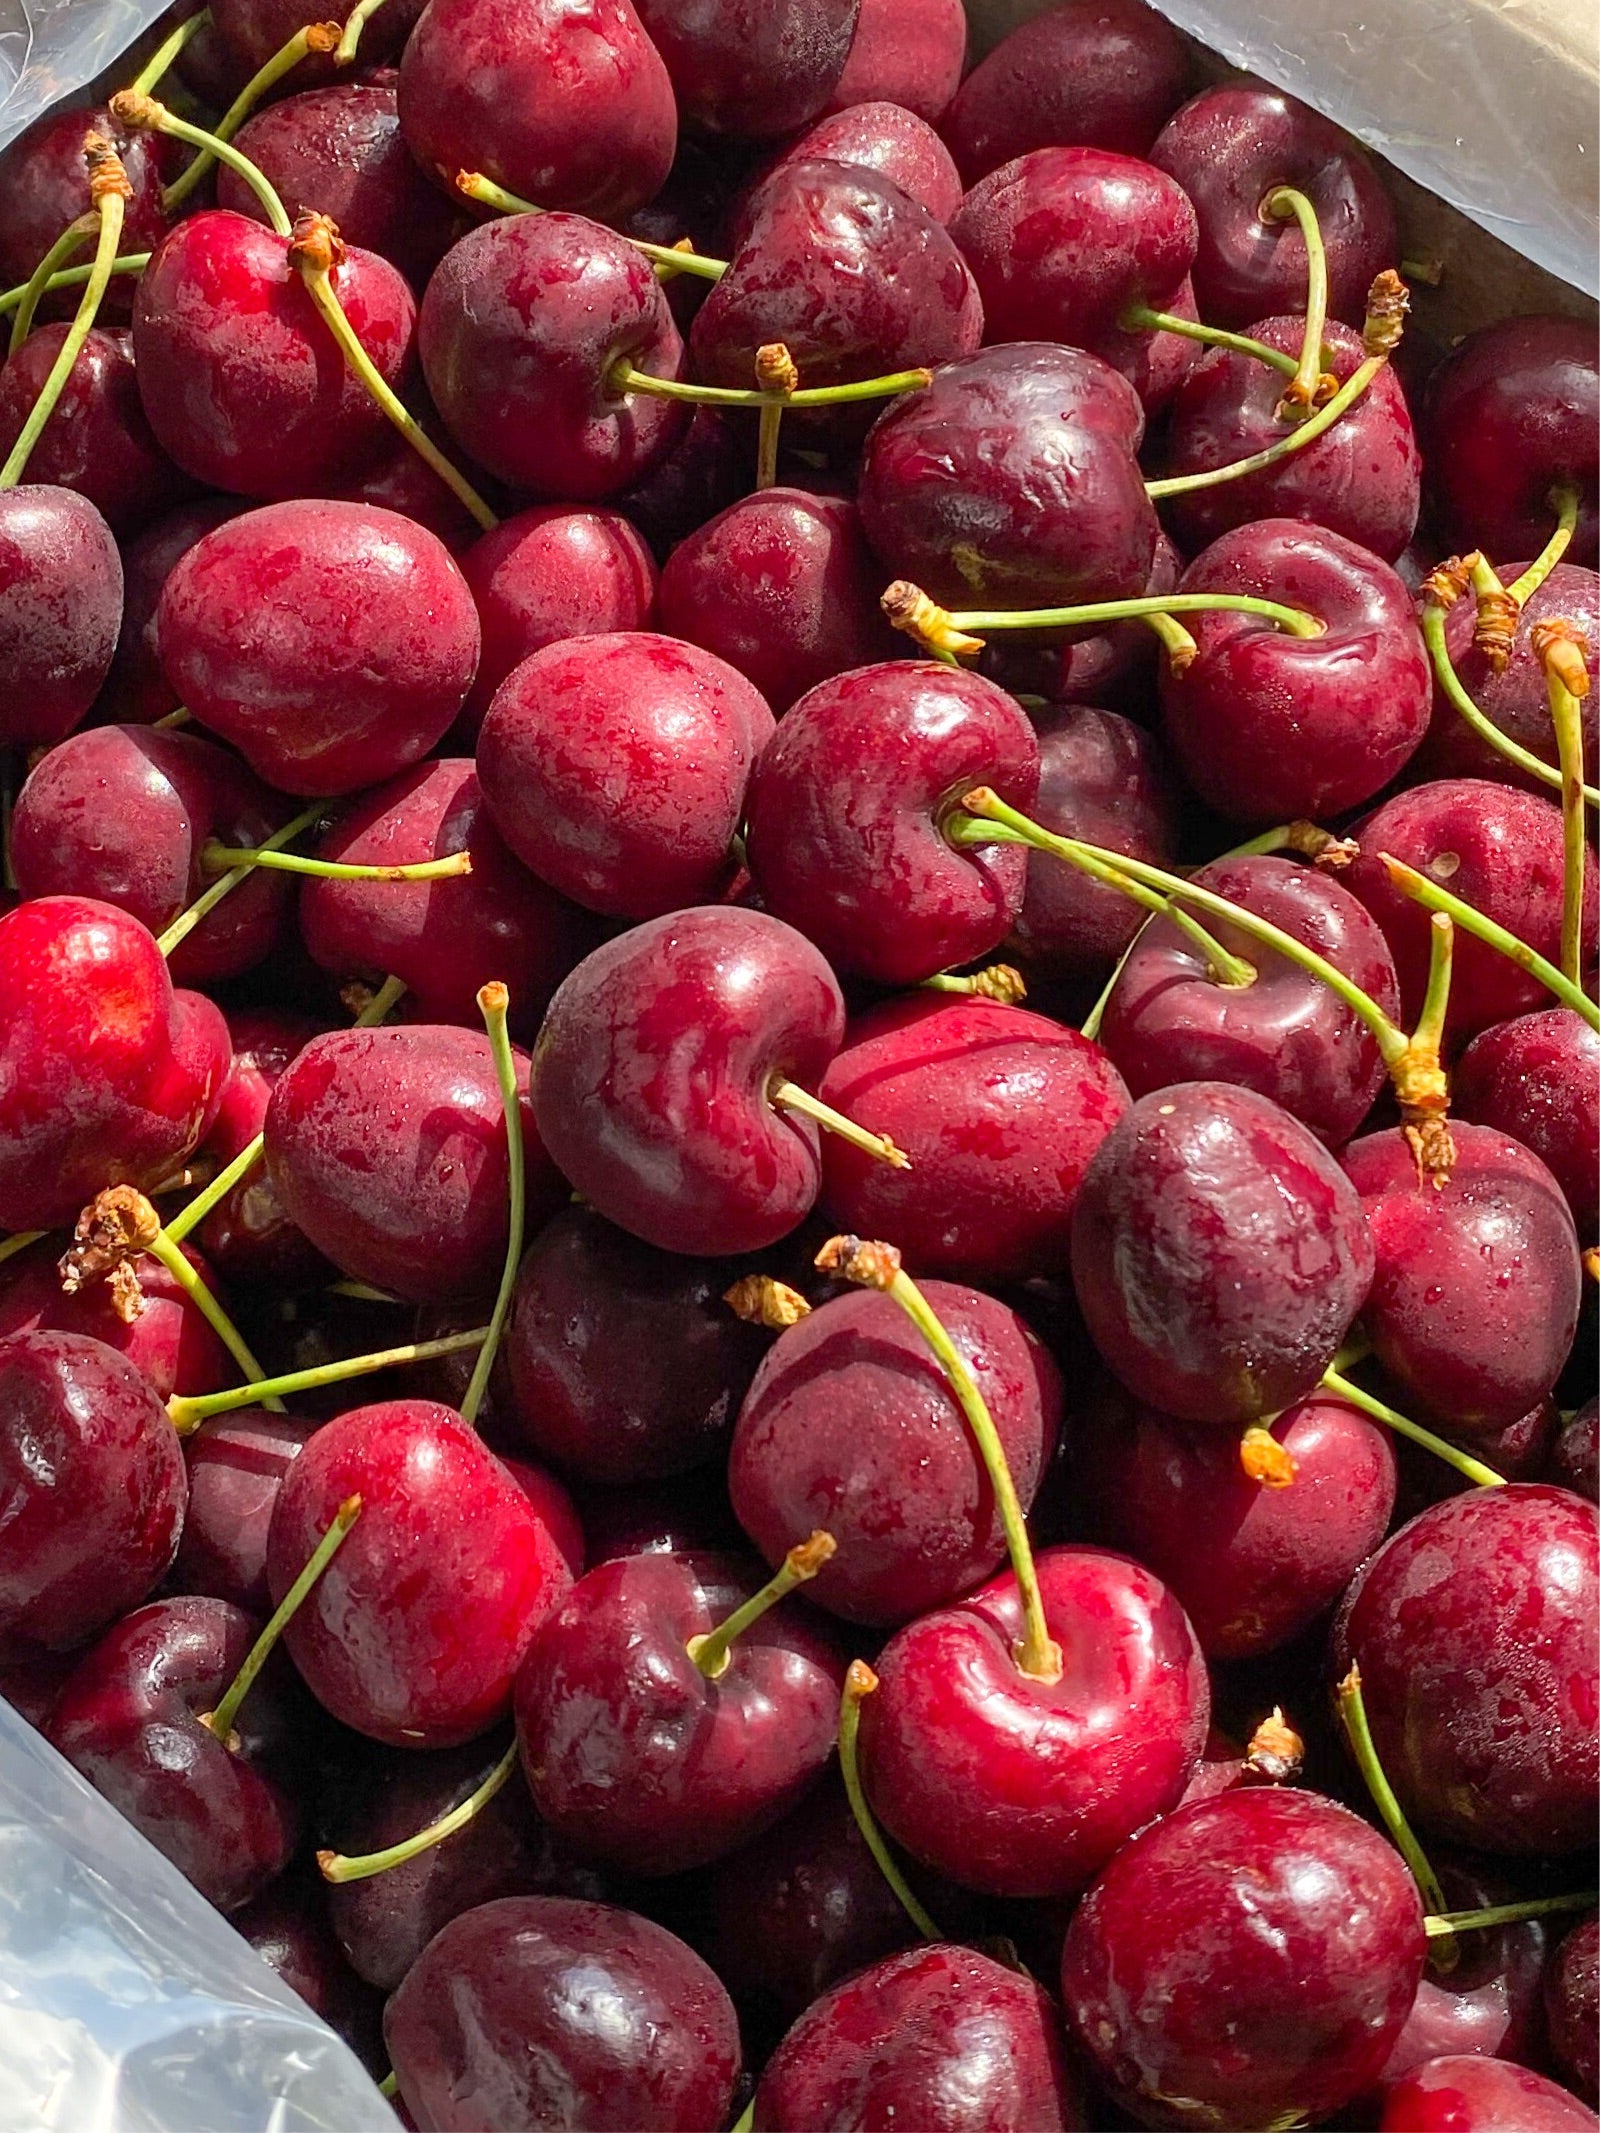 Buy 2kg Red Cherries for Php 3800